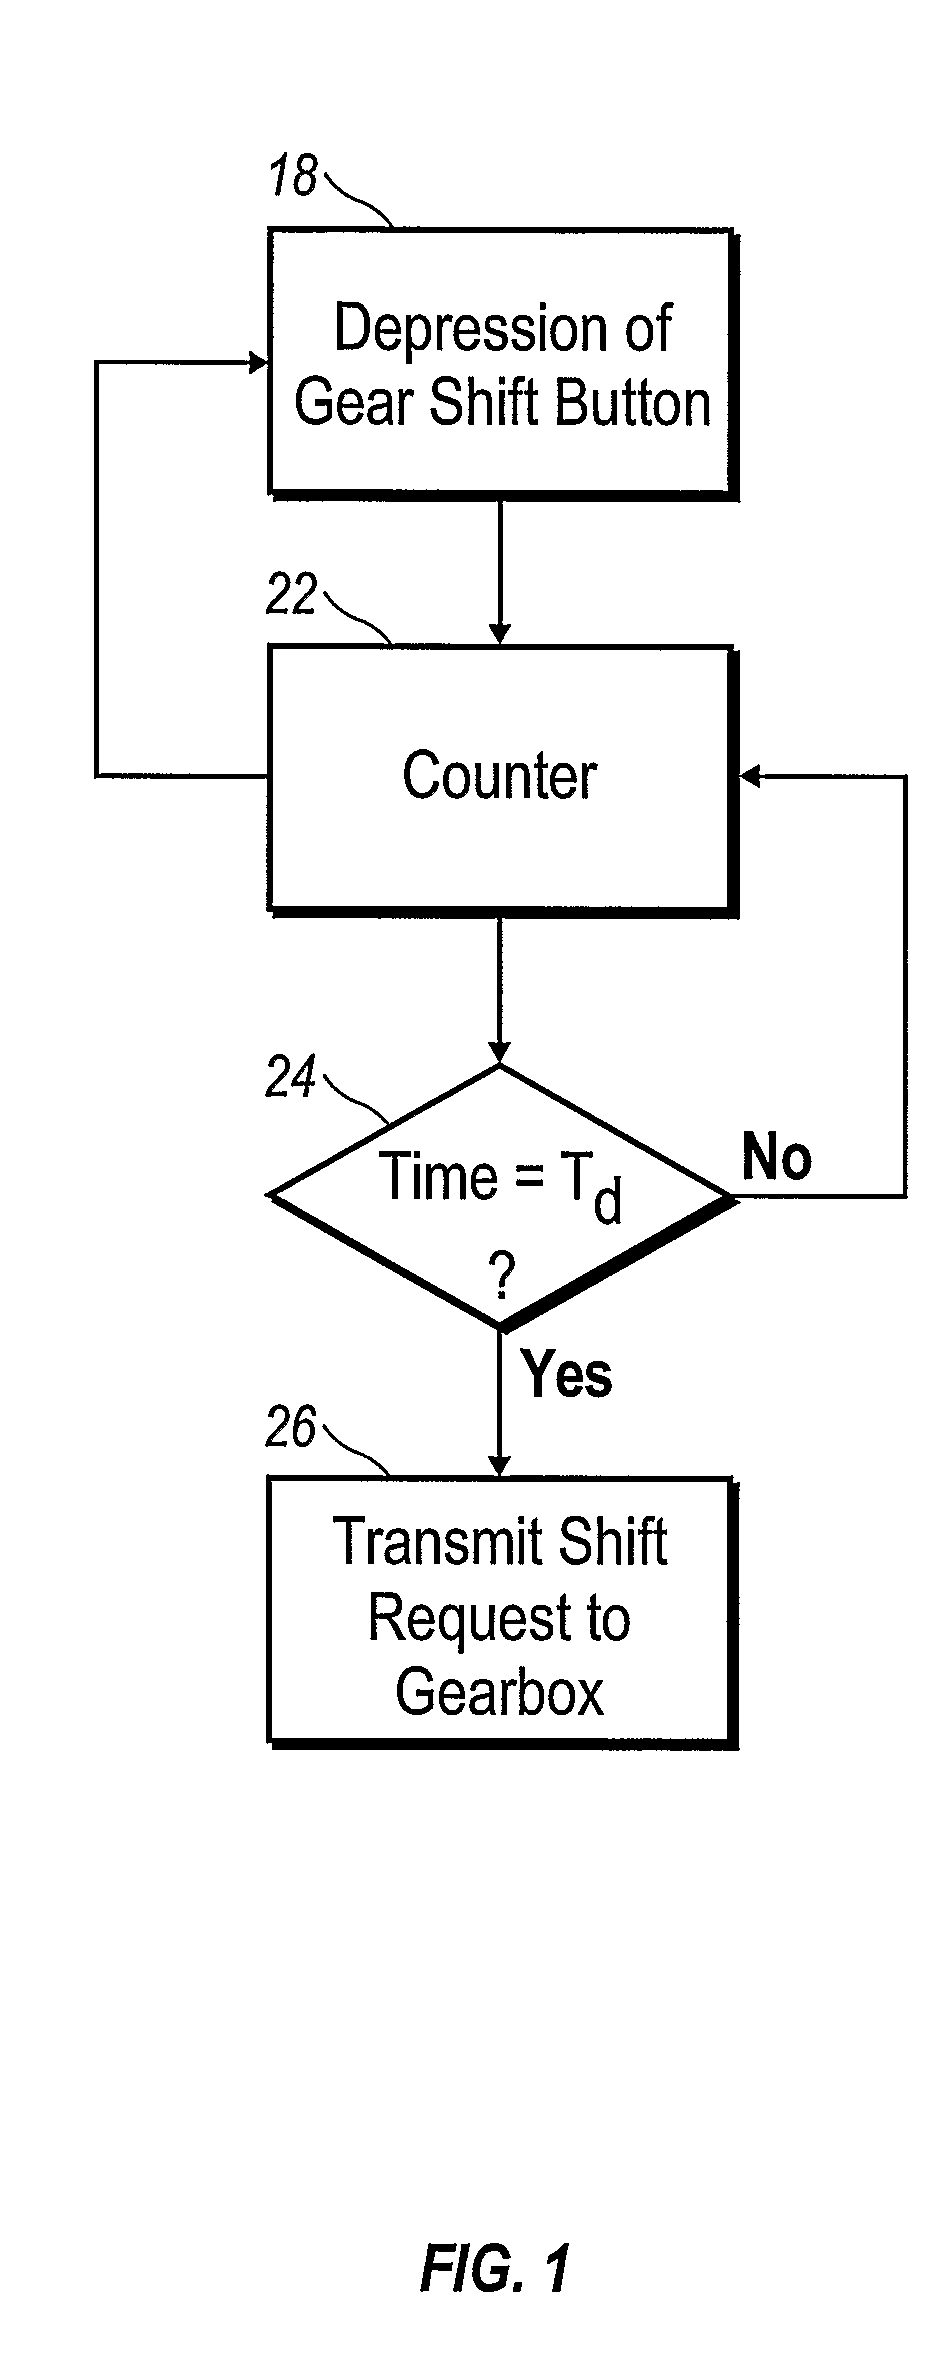 Method for instructing a collective gear shift request in a gear box and a method for communicating a gear shift instruction to a gear box